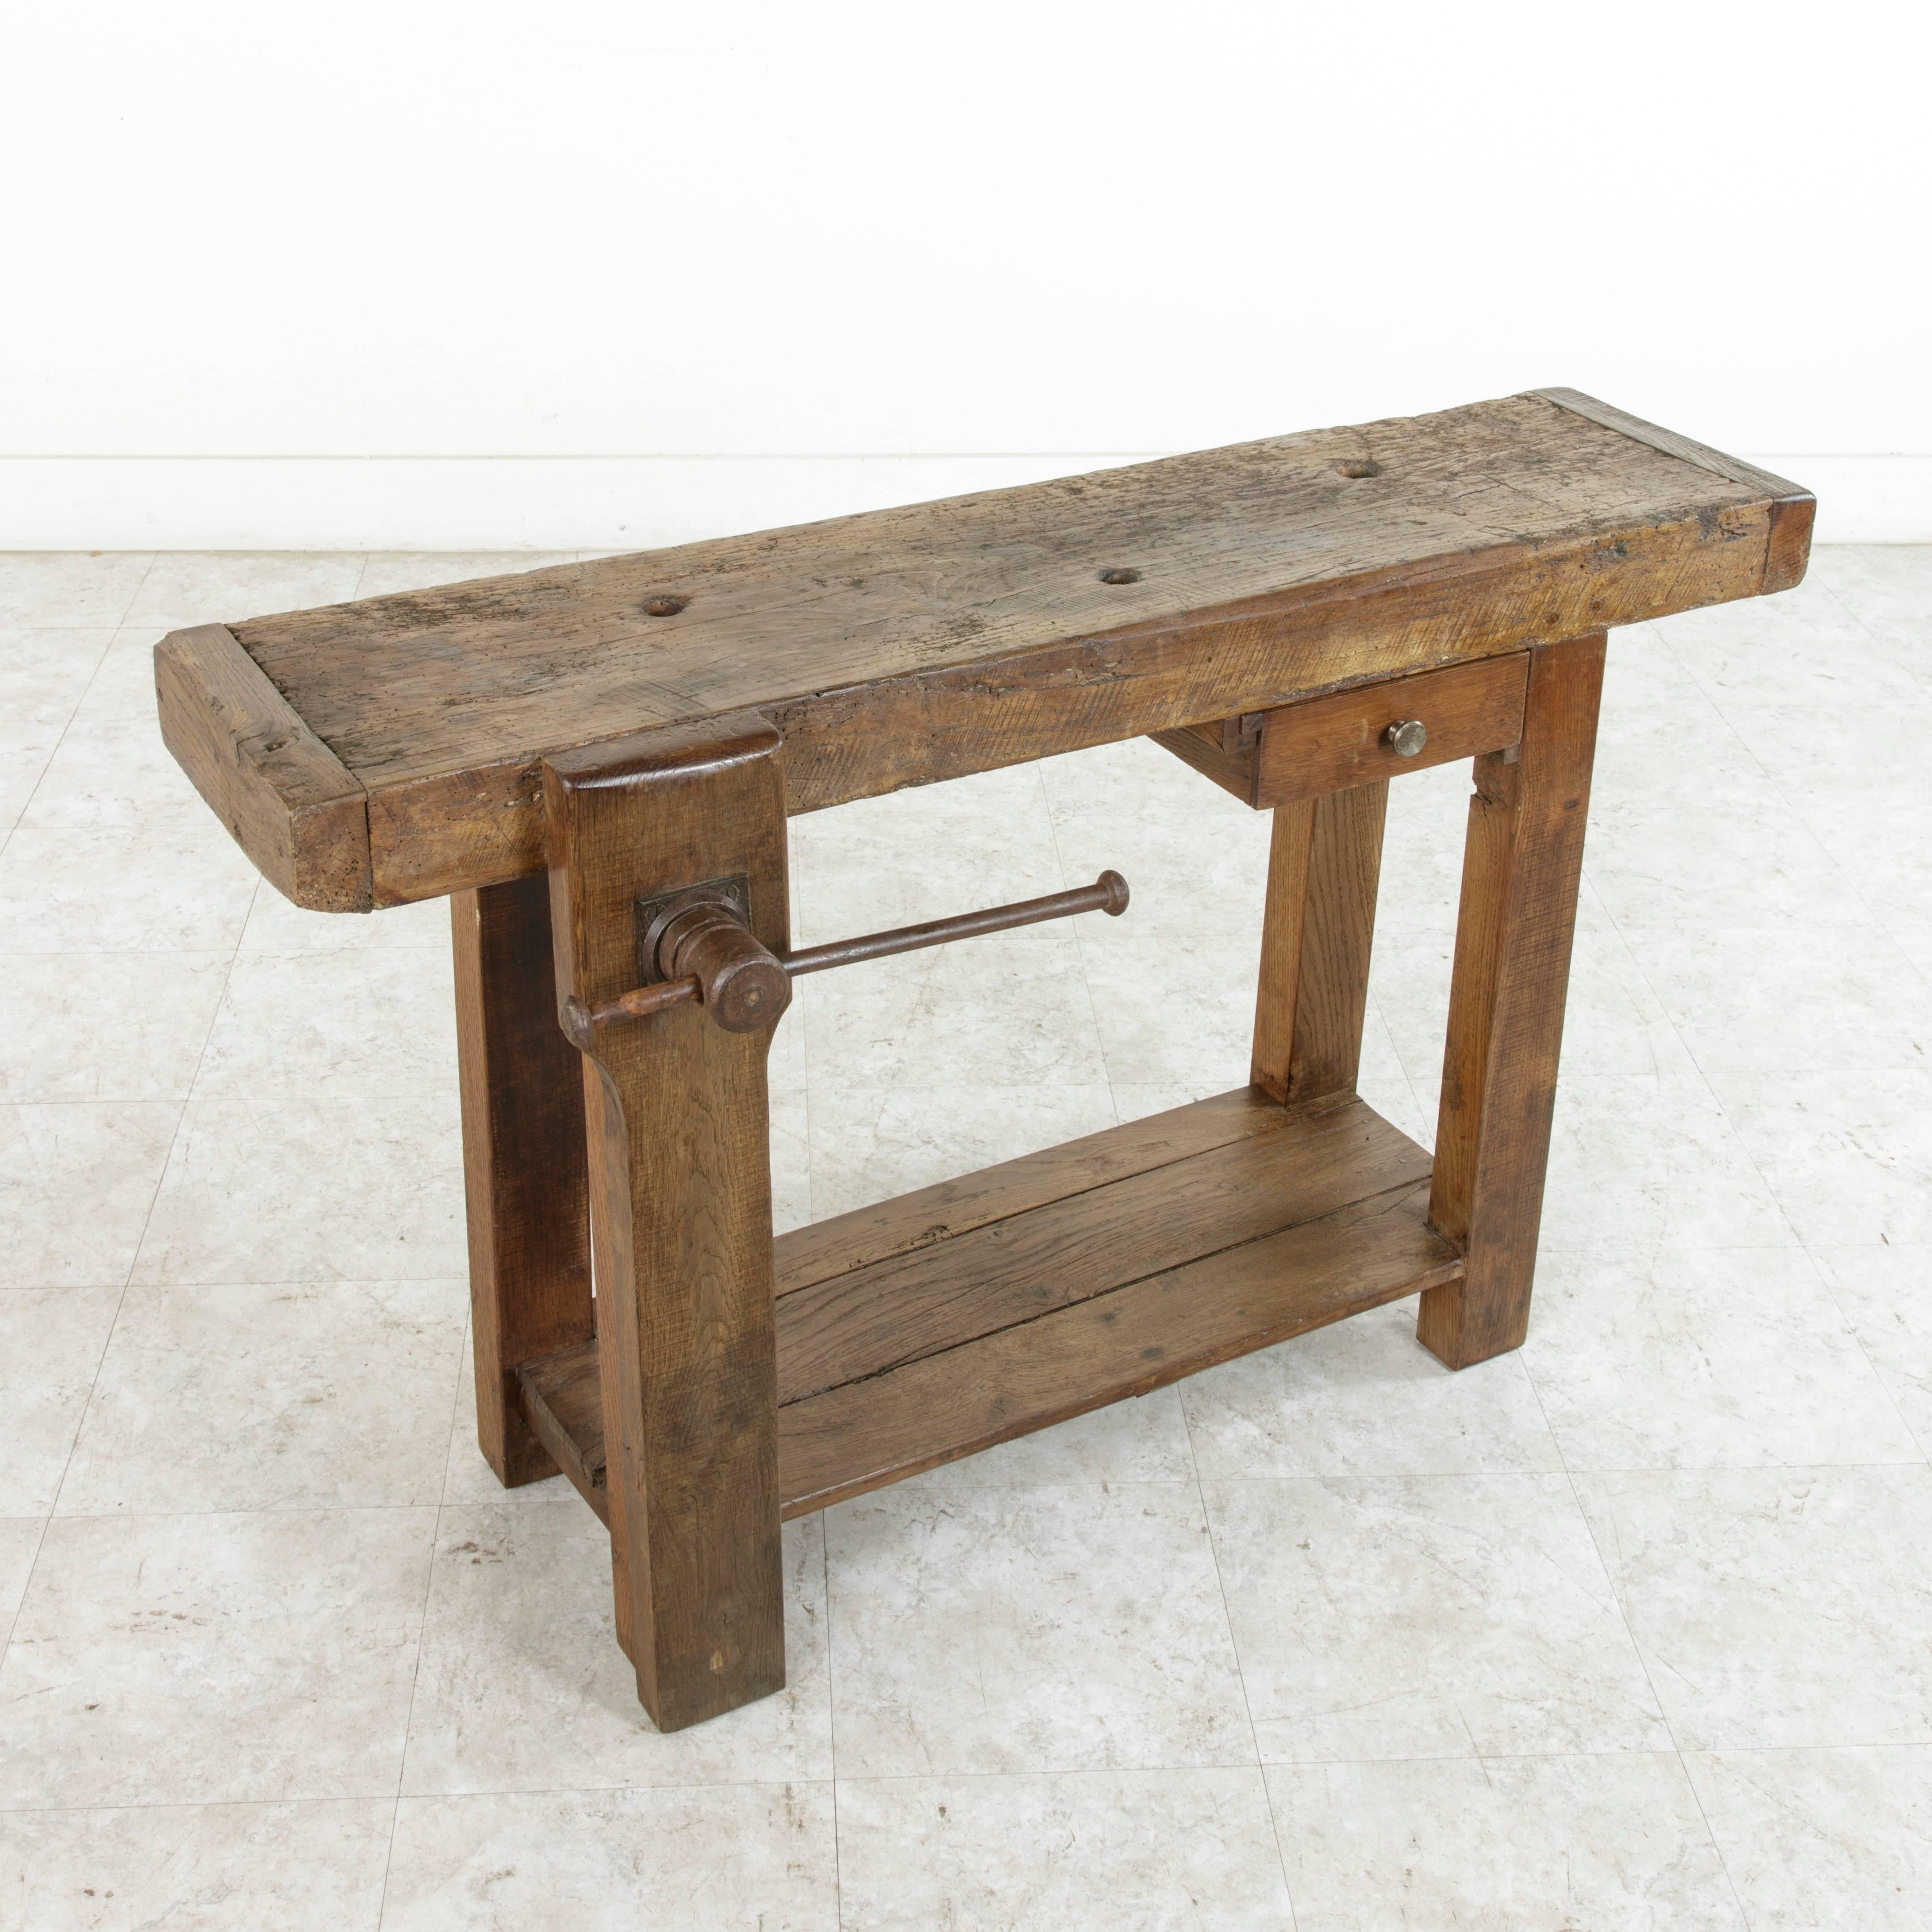 This early 20th century workbench from Normandy, France, is constructed of solid oak and features a three and one half inch thick top with a single lower drawer. The vice grip on the side can be positioned so that a hand towel can be hung from it,